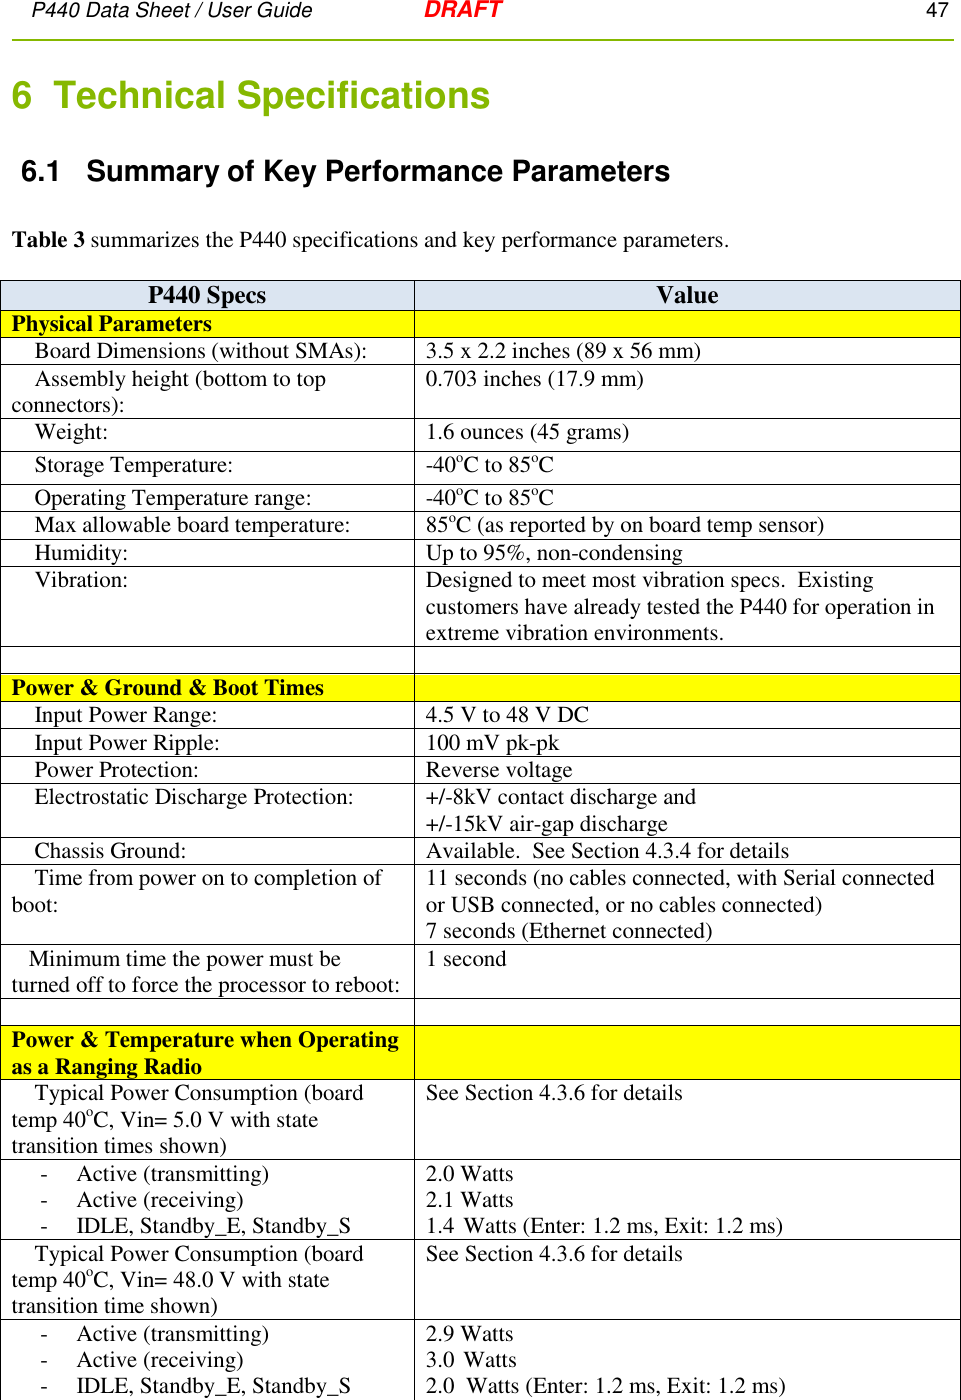 P440 Data Sheet / User Guide   DRAFT    47         6  Technical Specifications 6.1  Summary of Key Performance Parameters  Table 3 summarizes the P440 specifications and key performance parameters.    P440 Specs Value Physical Parameters      Board Dimensions (without SMAs): 3.5 x 2.2 inches (89 x 56 mm)     Assembly height (bottom to top connectors): 0.703 inches (17.9 mm)     Weight: 1.6 ounces (45 grams)      Storage Temperature: -40oC to 85oC       Operating Temperature range: -40oC to 85oC       Max allowable board temperature: 85oC (as reported by on board temp sensor)     Humidity: Up to 95%, non-condensing     Vibration: Designed to meet most vibration specs.  Existing customers have already tested the P440 for operation in extreme vibration environments.   Power &amp; Ground &amp; Boot Times      Input Power Range: 4.5 V to 48 V DC     Input Power Ripple: 100 mV pk-pk     Power Protection: Reverse voltage      Electrostatic Discharge Protection: +/-8kV contact discharge and +/-15kV air-gap discharge     Chassis Ground: Available.  See Section 4.3.4 for details     Time from power on to completion of boot: 11 seconds (no cables connected, with Serial connected or USB connected, or no cables connected) 7 seconds (Ethernet connected)    Minimum time the power must be turned off to force the processor to reboot: 1 second   Power &amp; Temperature when Operating as a Ranging Radio      Typical Power Consumption (board temp 40oC, Vin= 5.0 V with state transition times shown) See Section 4.3.6 for details      -     Active (transmitting)      -     Active (receiving)      -     IDLE, Standby_E, Standby_S 2.0 Watts  2.1 Watts 1.4 Watts (Enter: 1.2 ms, Exit: 1.2 ms)     Typical Power Consumption (board temp 40oC, Vin= 48.0 V with state transition time shown)  See Section 4.3.6 for details      -     Active (transmitting)      -     Active (receiving)      -     IDLE, Standby_E, Standby_S 2.9 Watts  3.0 Watts 2.0  Watts (Enter: 1.2 ms, Exit: 1.2 ms) 